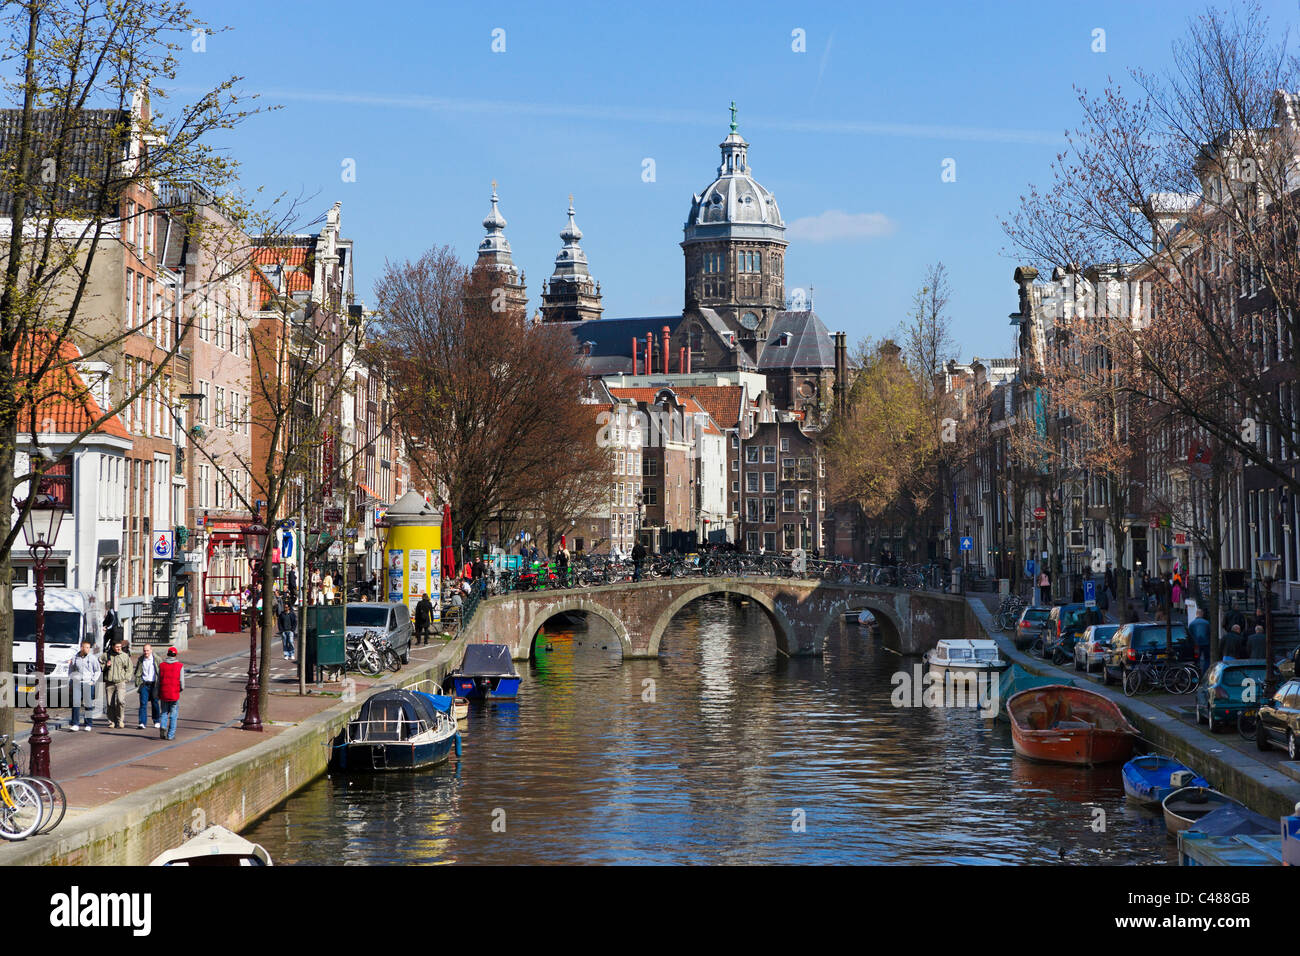 The Sint-Nicolaaskerk (Church of St Nicholas) at the end of the Oudezijds Voorburgwal, Amsterdam, Netherlands Stock Photo